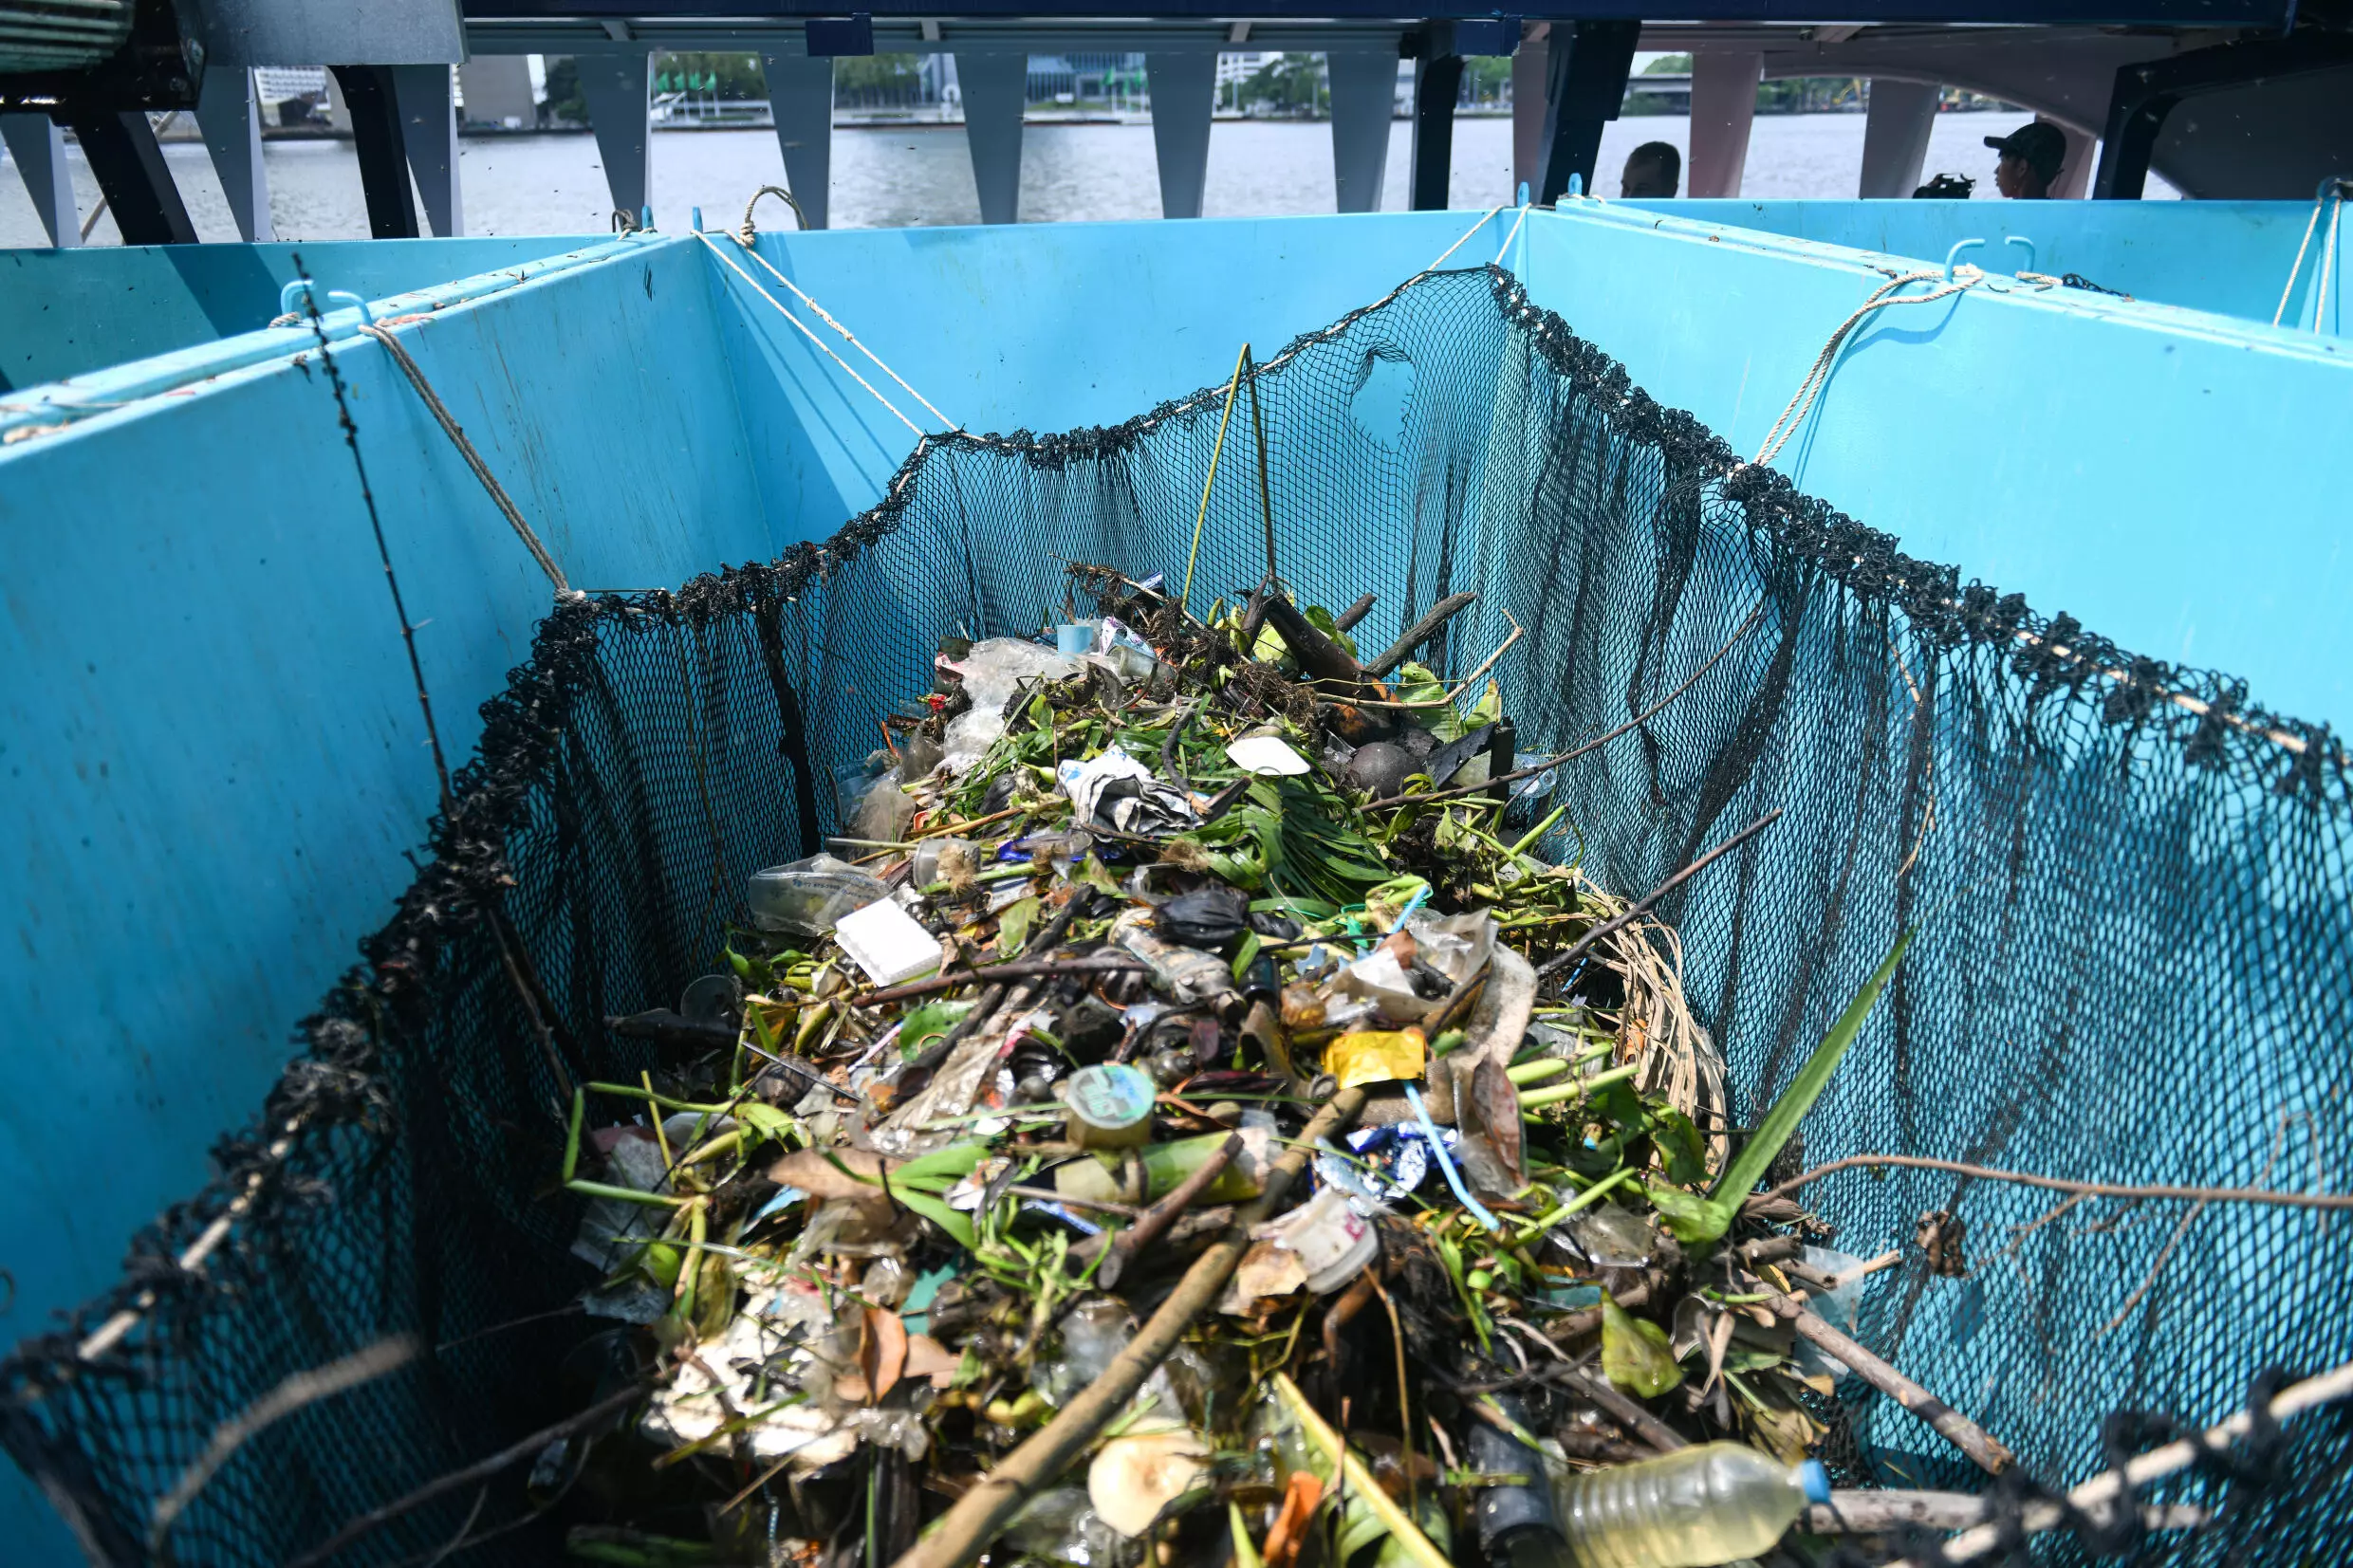 Ticking bamboo-slatted treadmills carry the collected waste into the barge, where it is deposited into bright blue skips and taken ashore to be disposed of by local authorities in Bangkok, Thailand. /AFP